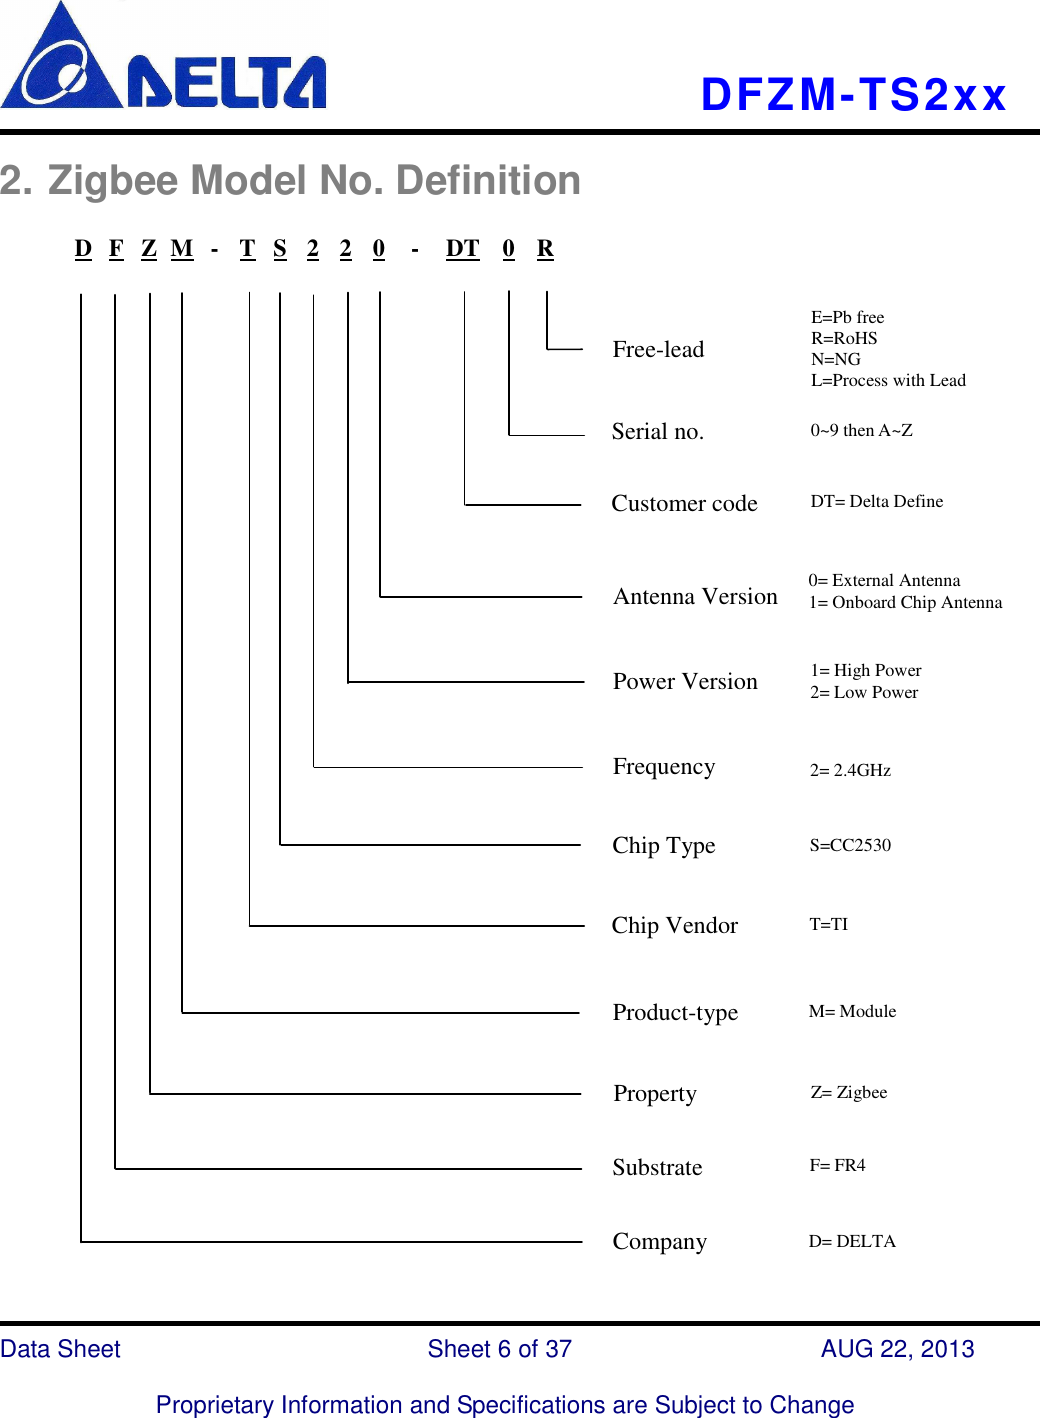    DFZM-TS2xx   Data Sheet                              Sheet 6 of 37                    AUG 22, 2013  Proprietary Information and Specifications are Subject to Change 2. Zigbee Model No. Definition                         D F Z M - T S 2 2 0 - DT 0 R 1= High Power 2= Low Power E=Pb free R=RoHS N=NG L=Process with Lead Customer code Antenna Version Free-lead Power Version Frequency M= Module Z= Zigbee F= FR4 D= DELTA 2= 2.4GHz Chip Vendor Product-type Property Substrate Company T=TI 0= External Antenna 1= Onboard Chip Antenna DT= Delta Define Chip Type S=CC2530 0~9 then A~Z Serial no. 